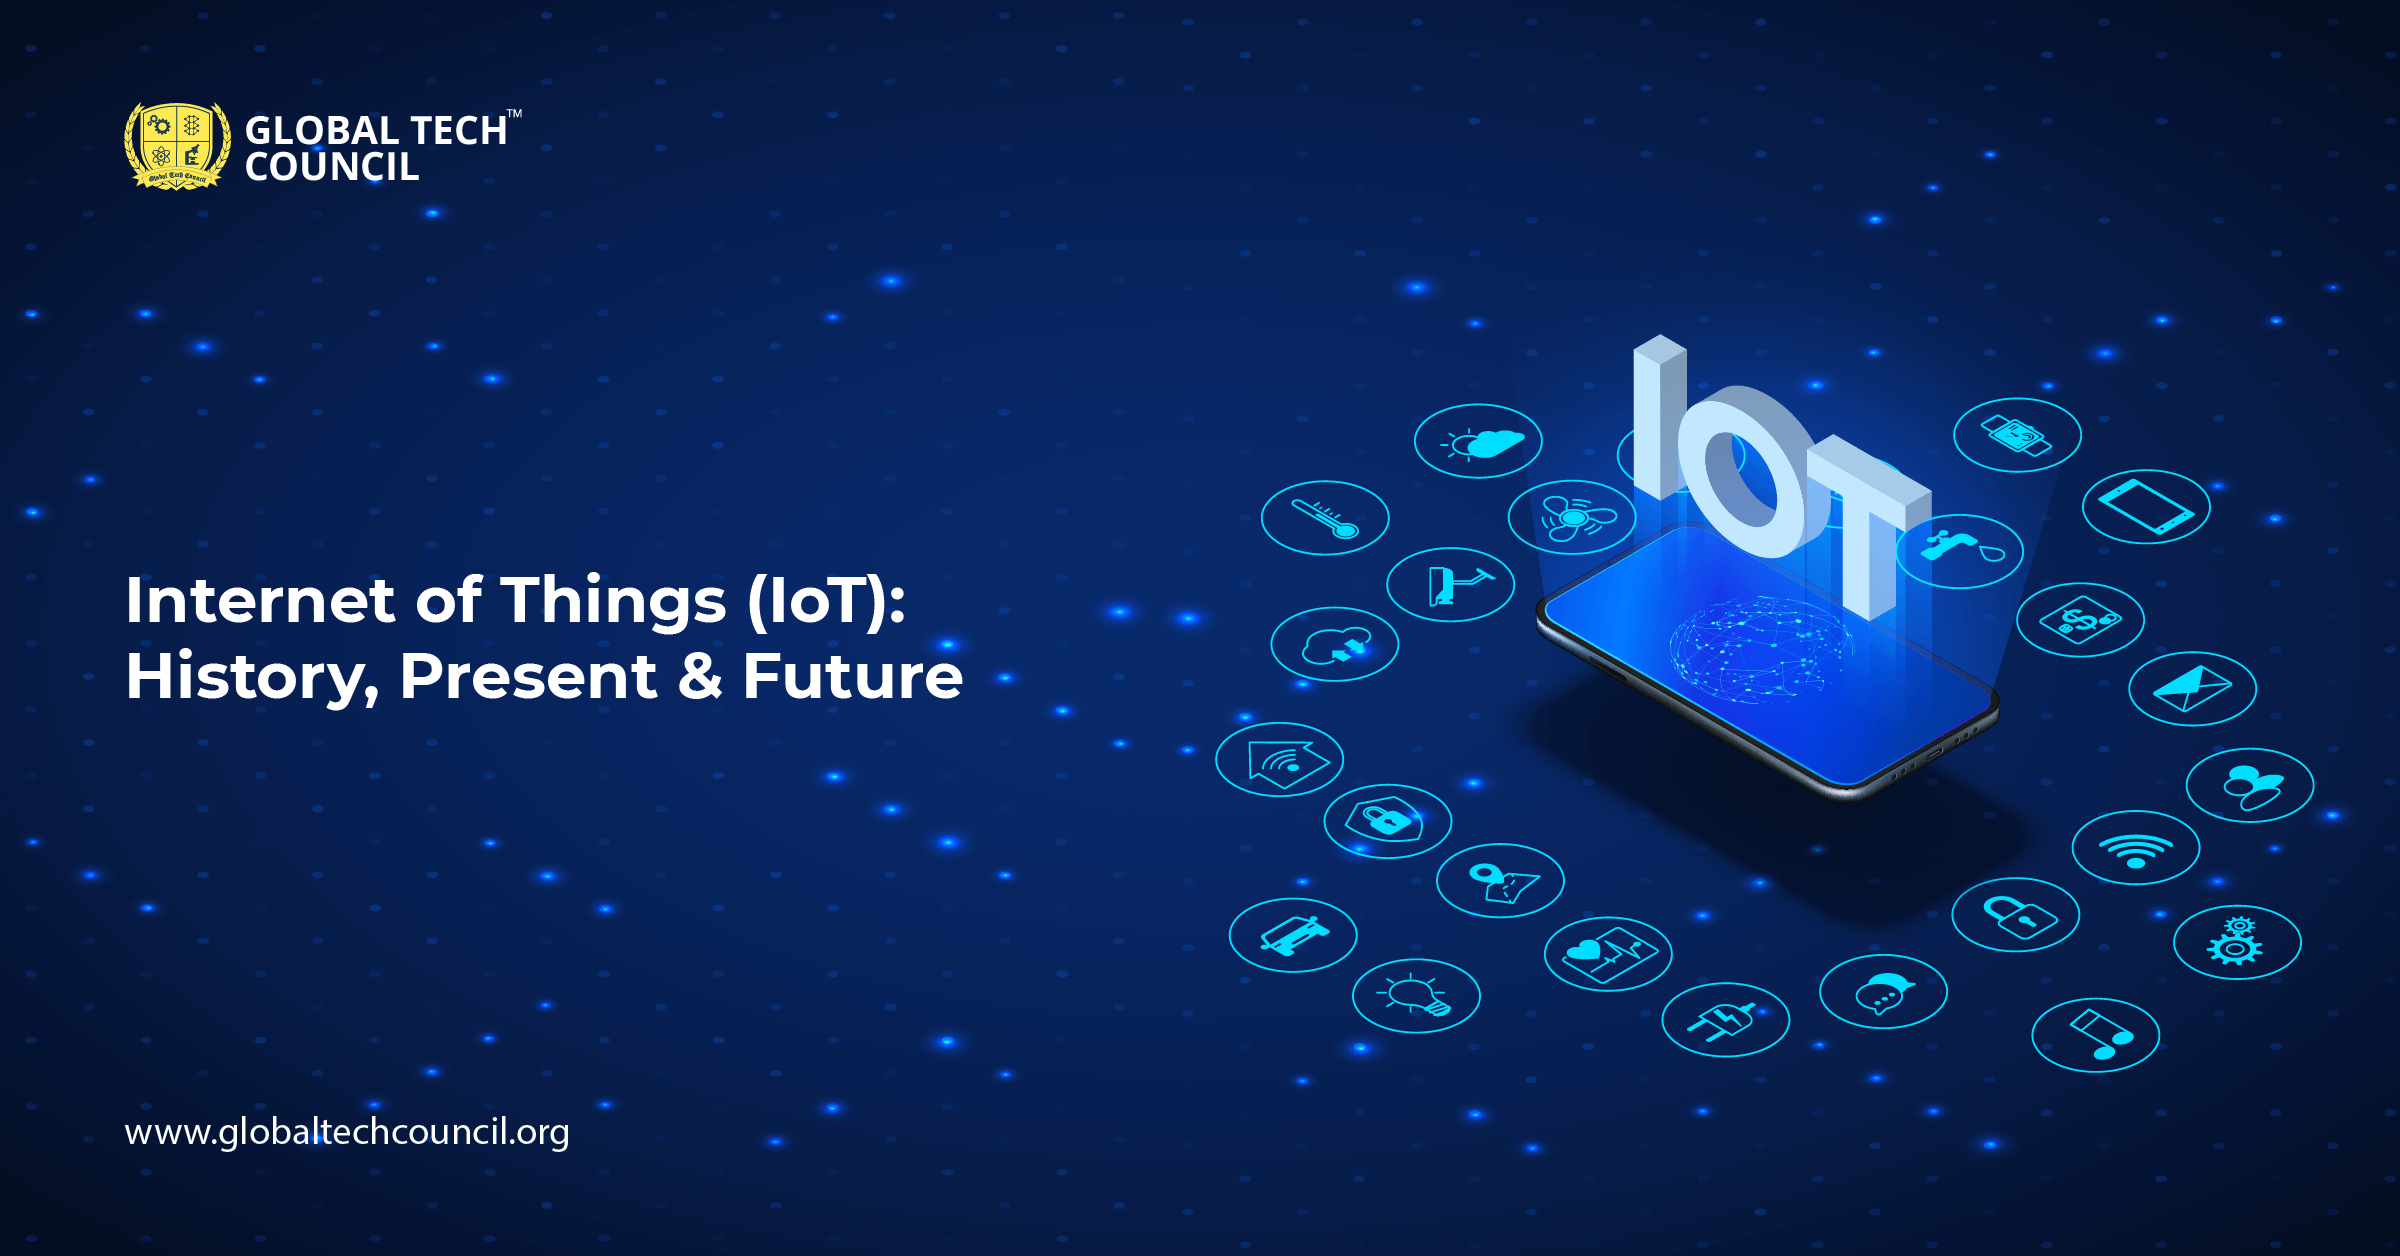 Internet of Things (IoT) History, Present & Future